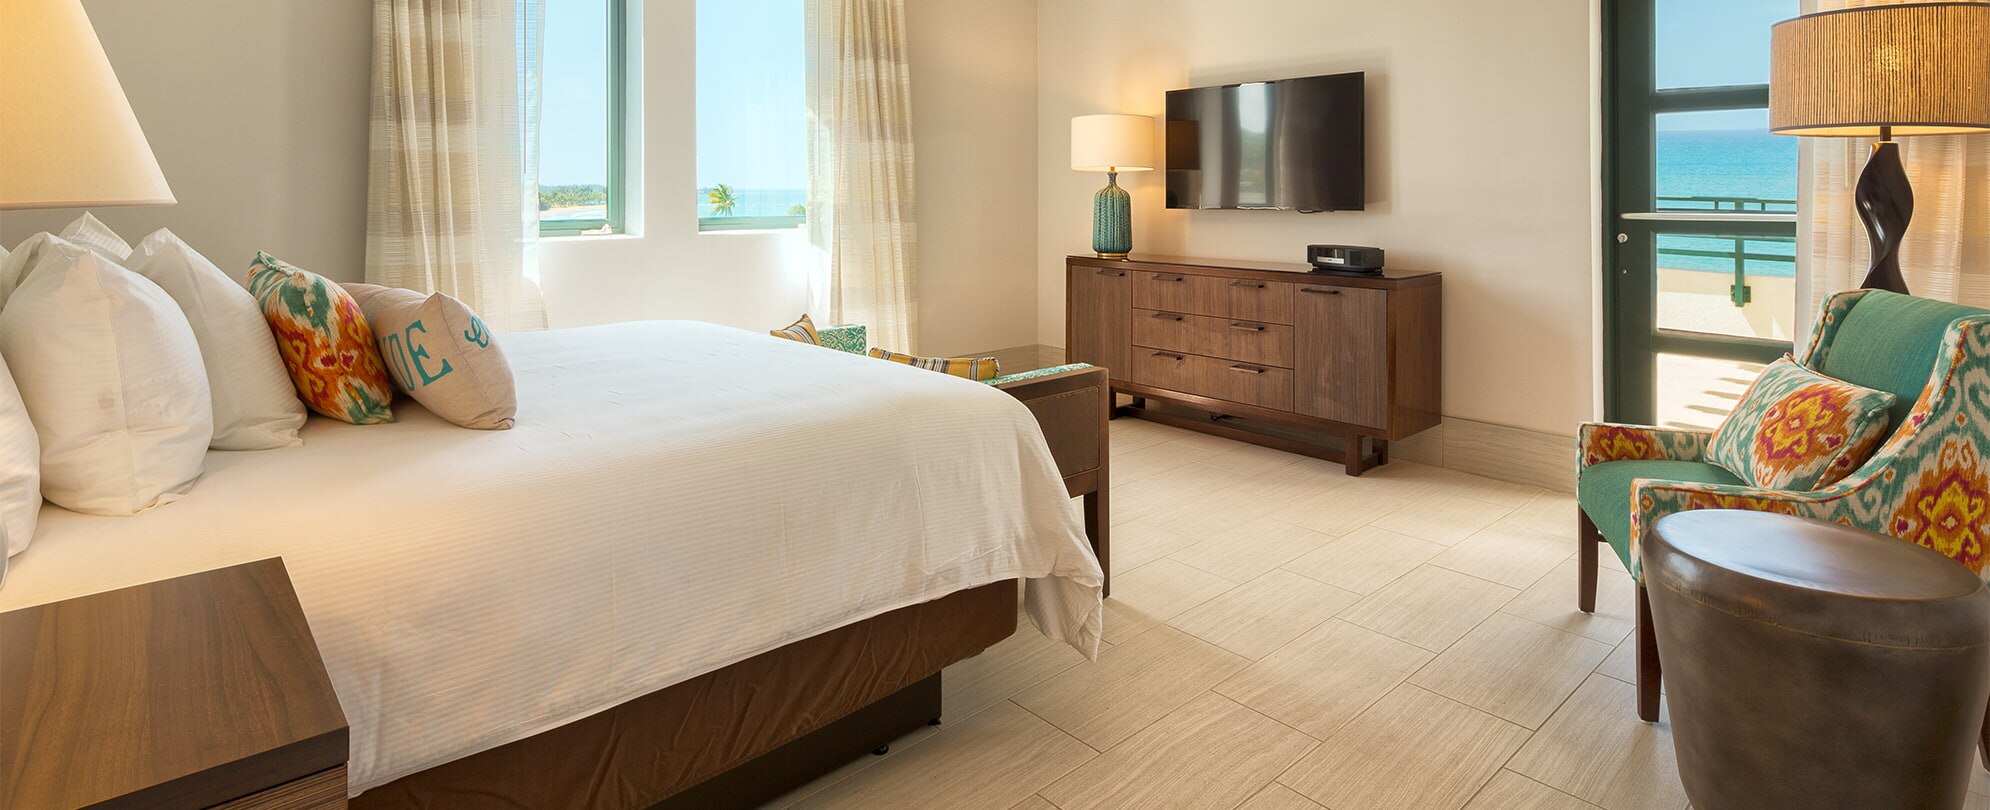 Large bedroom with an ocean view in a Presidential Reserve suite at Margaritaville Vacation Club resort in Rio Mar.